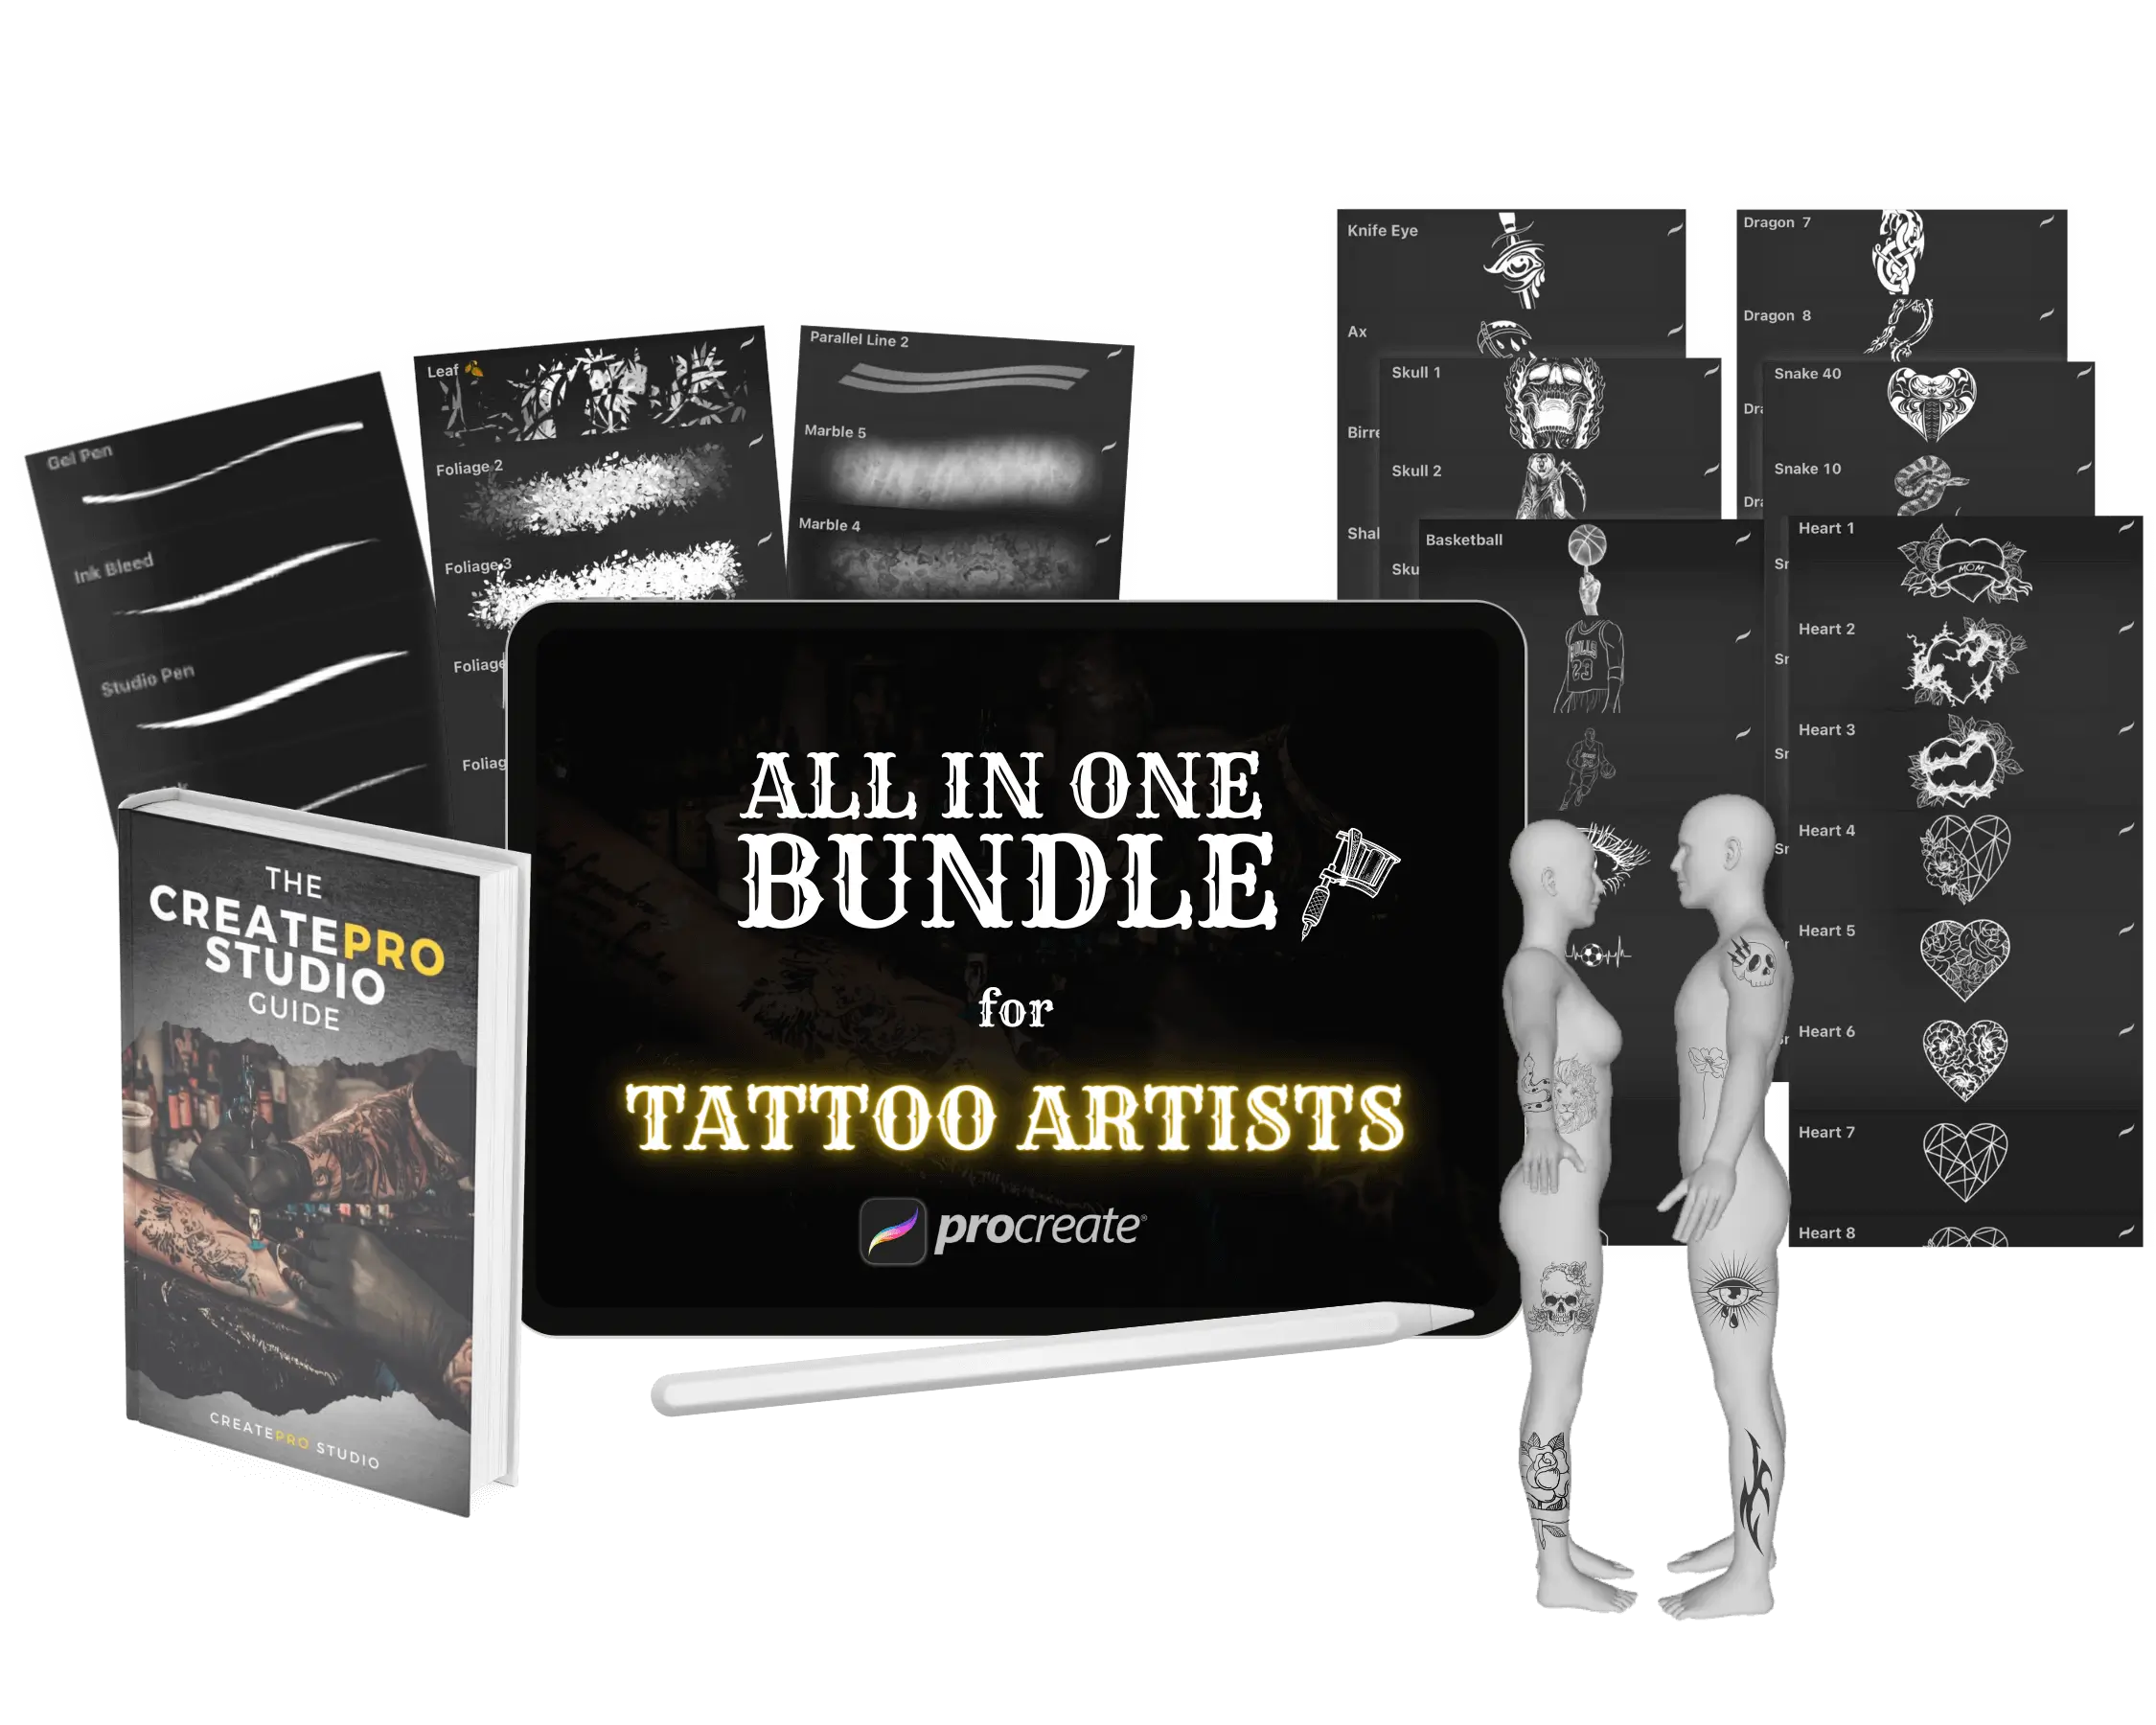 All-in-one-bundle-for-tattoo-artist.webp__PID:a5e2ace9-a987-4f00-aa7a-81c2dc569df8